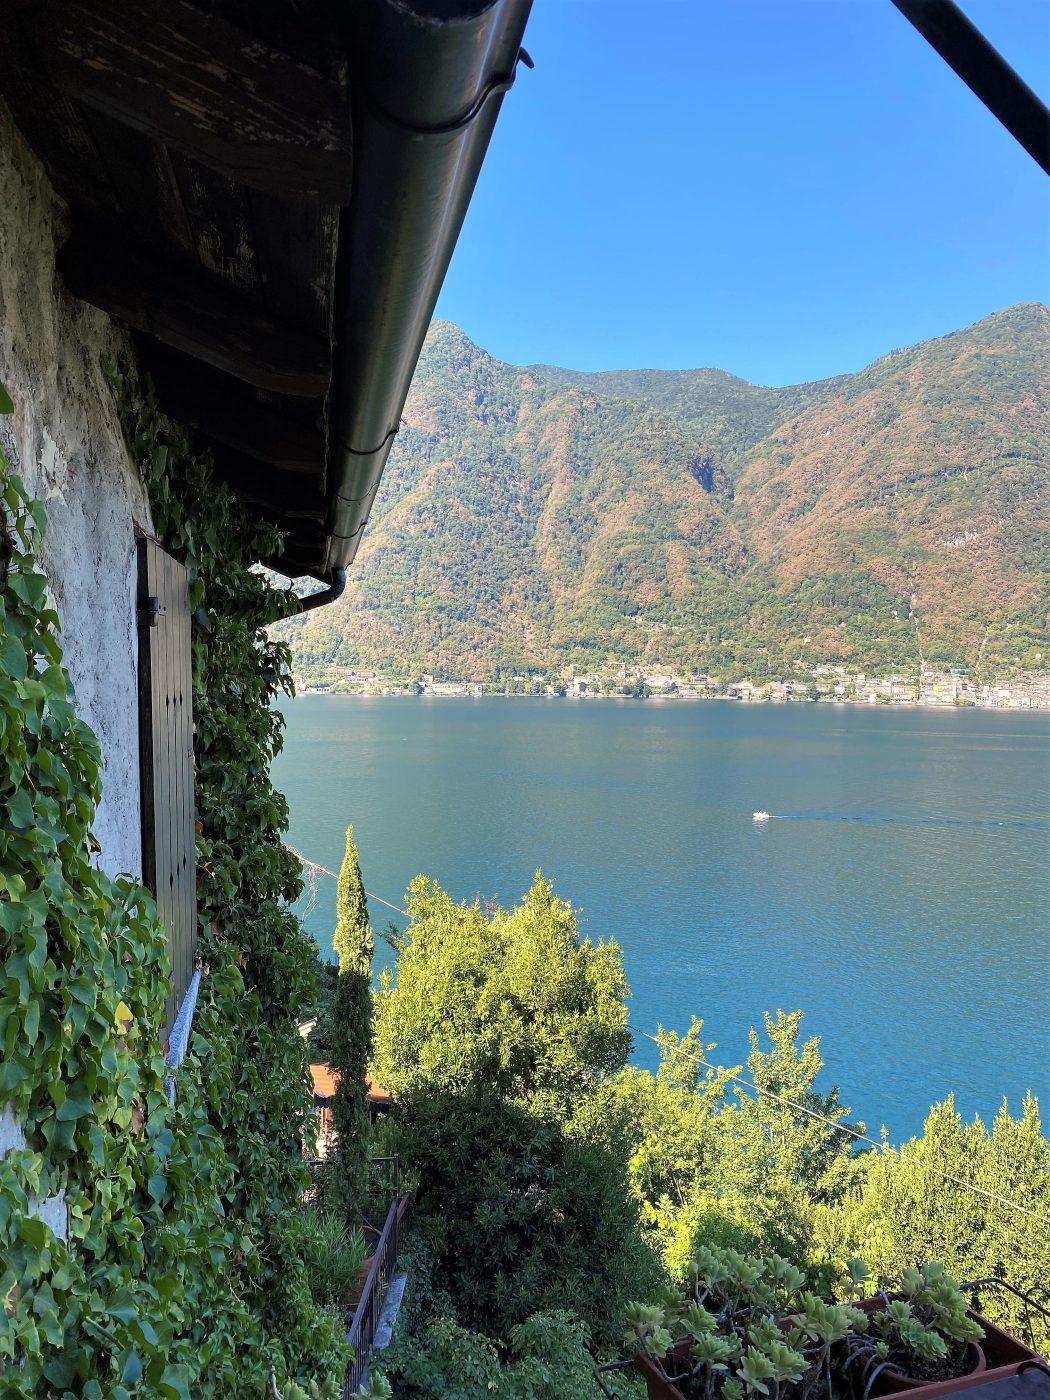 Ancient house with lake view in Nesso